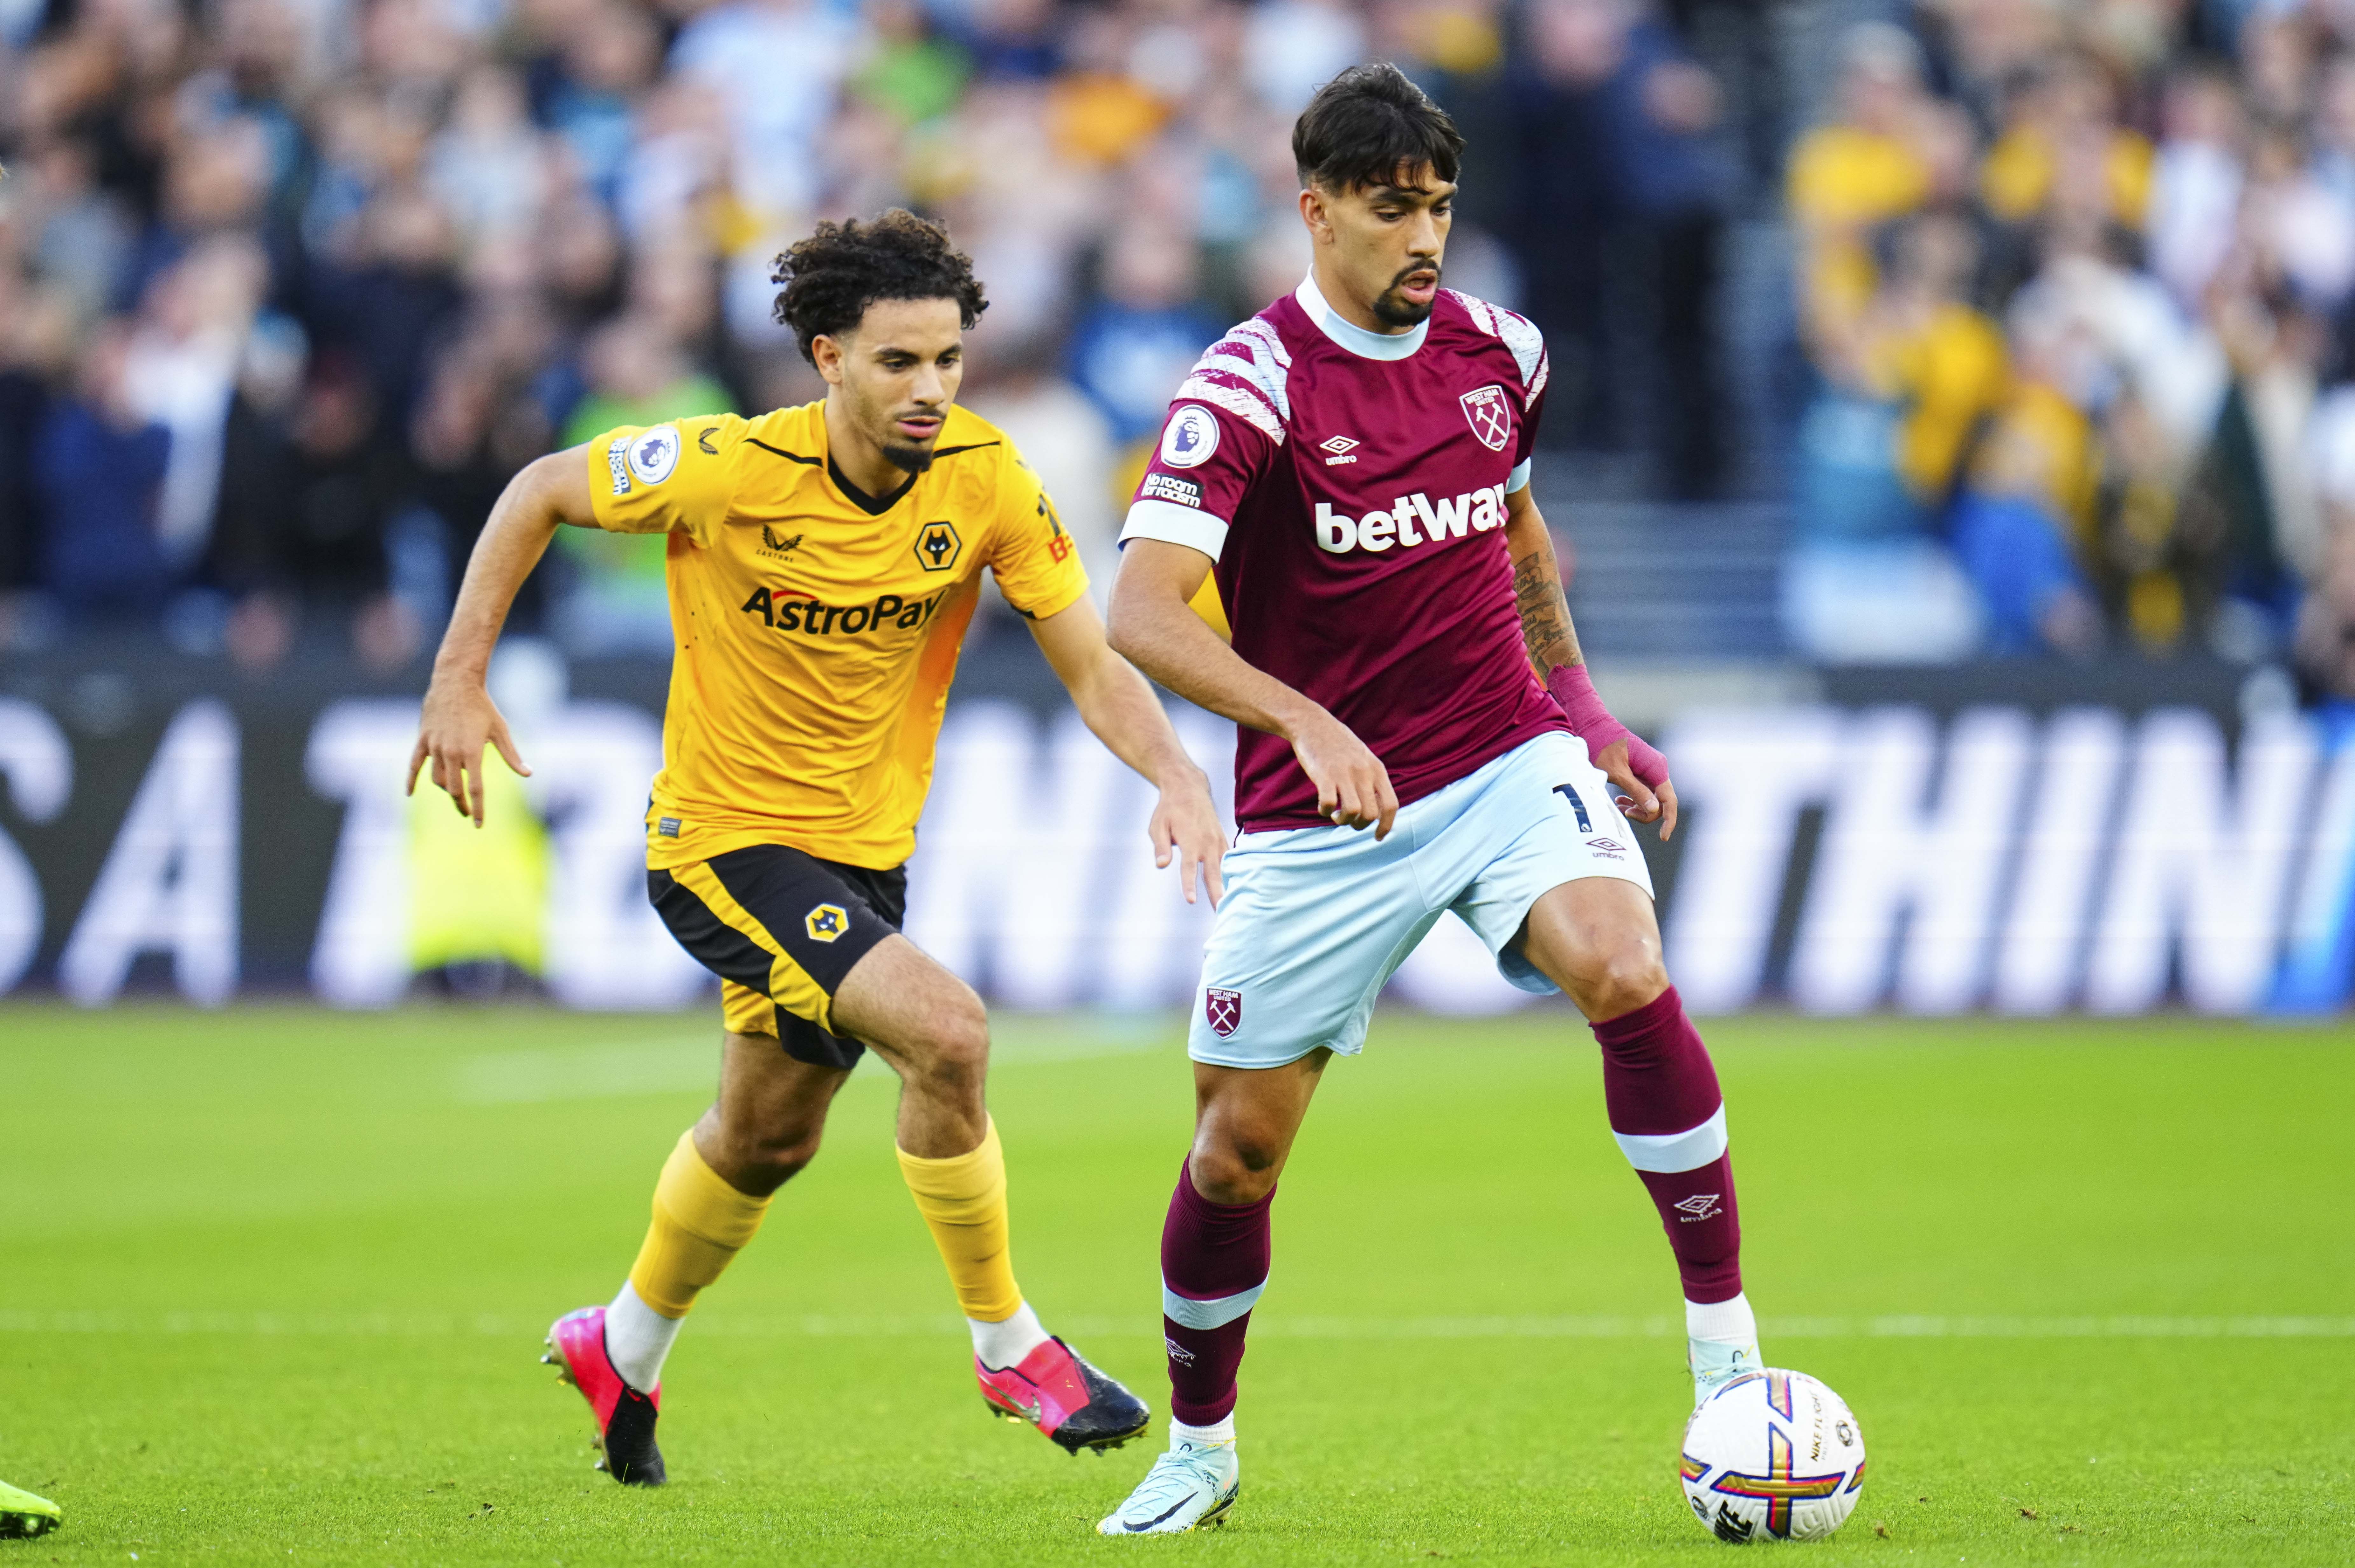 Lucas Paquetá in action against Wolves